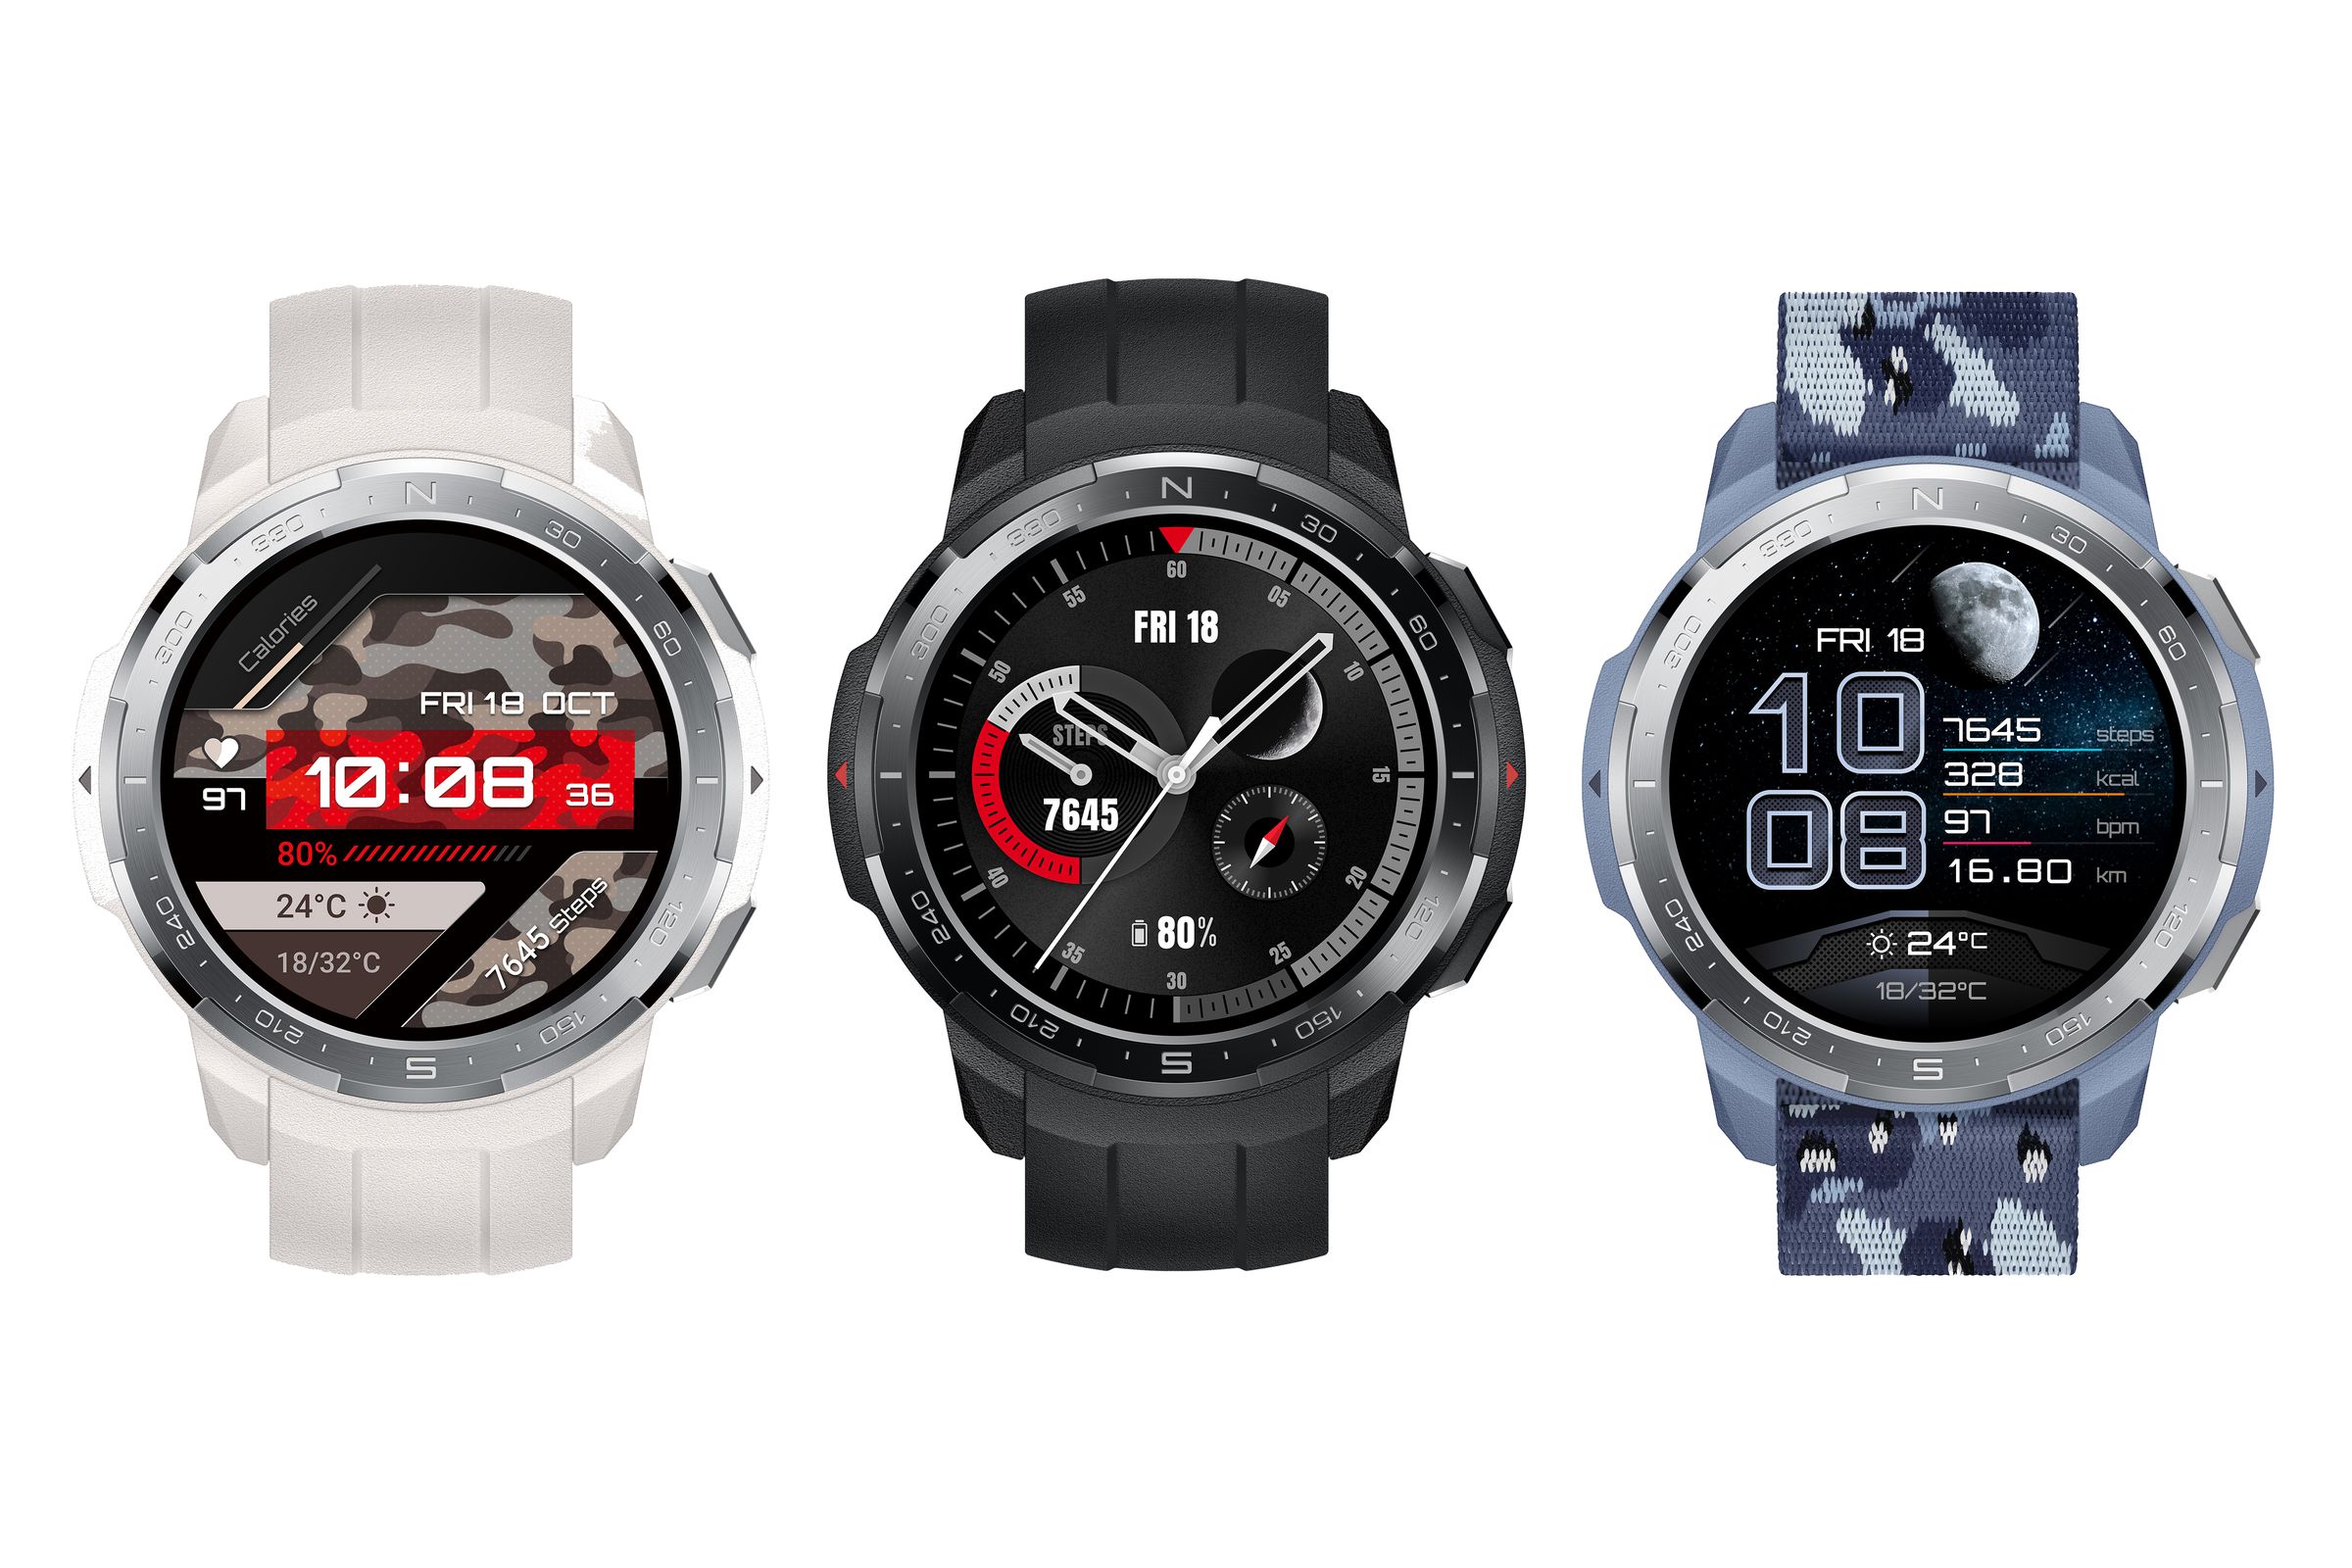 The Honor Watch GS Pro is available in black, white, and blue.